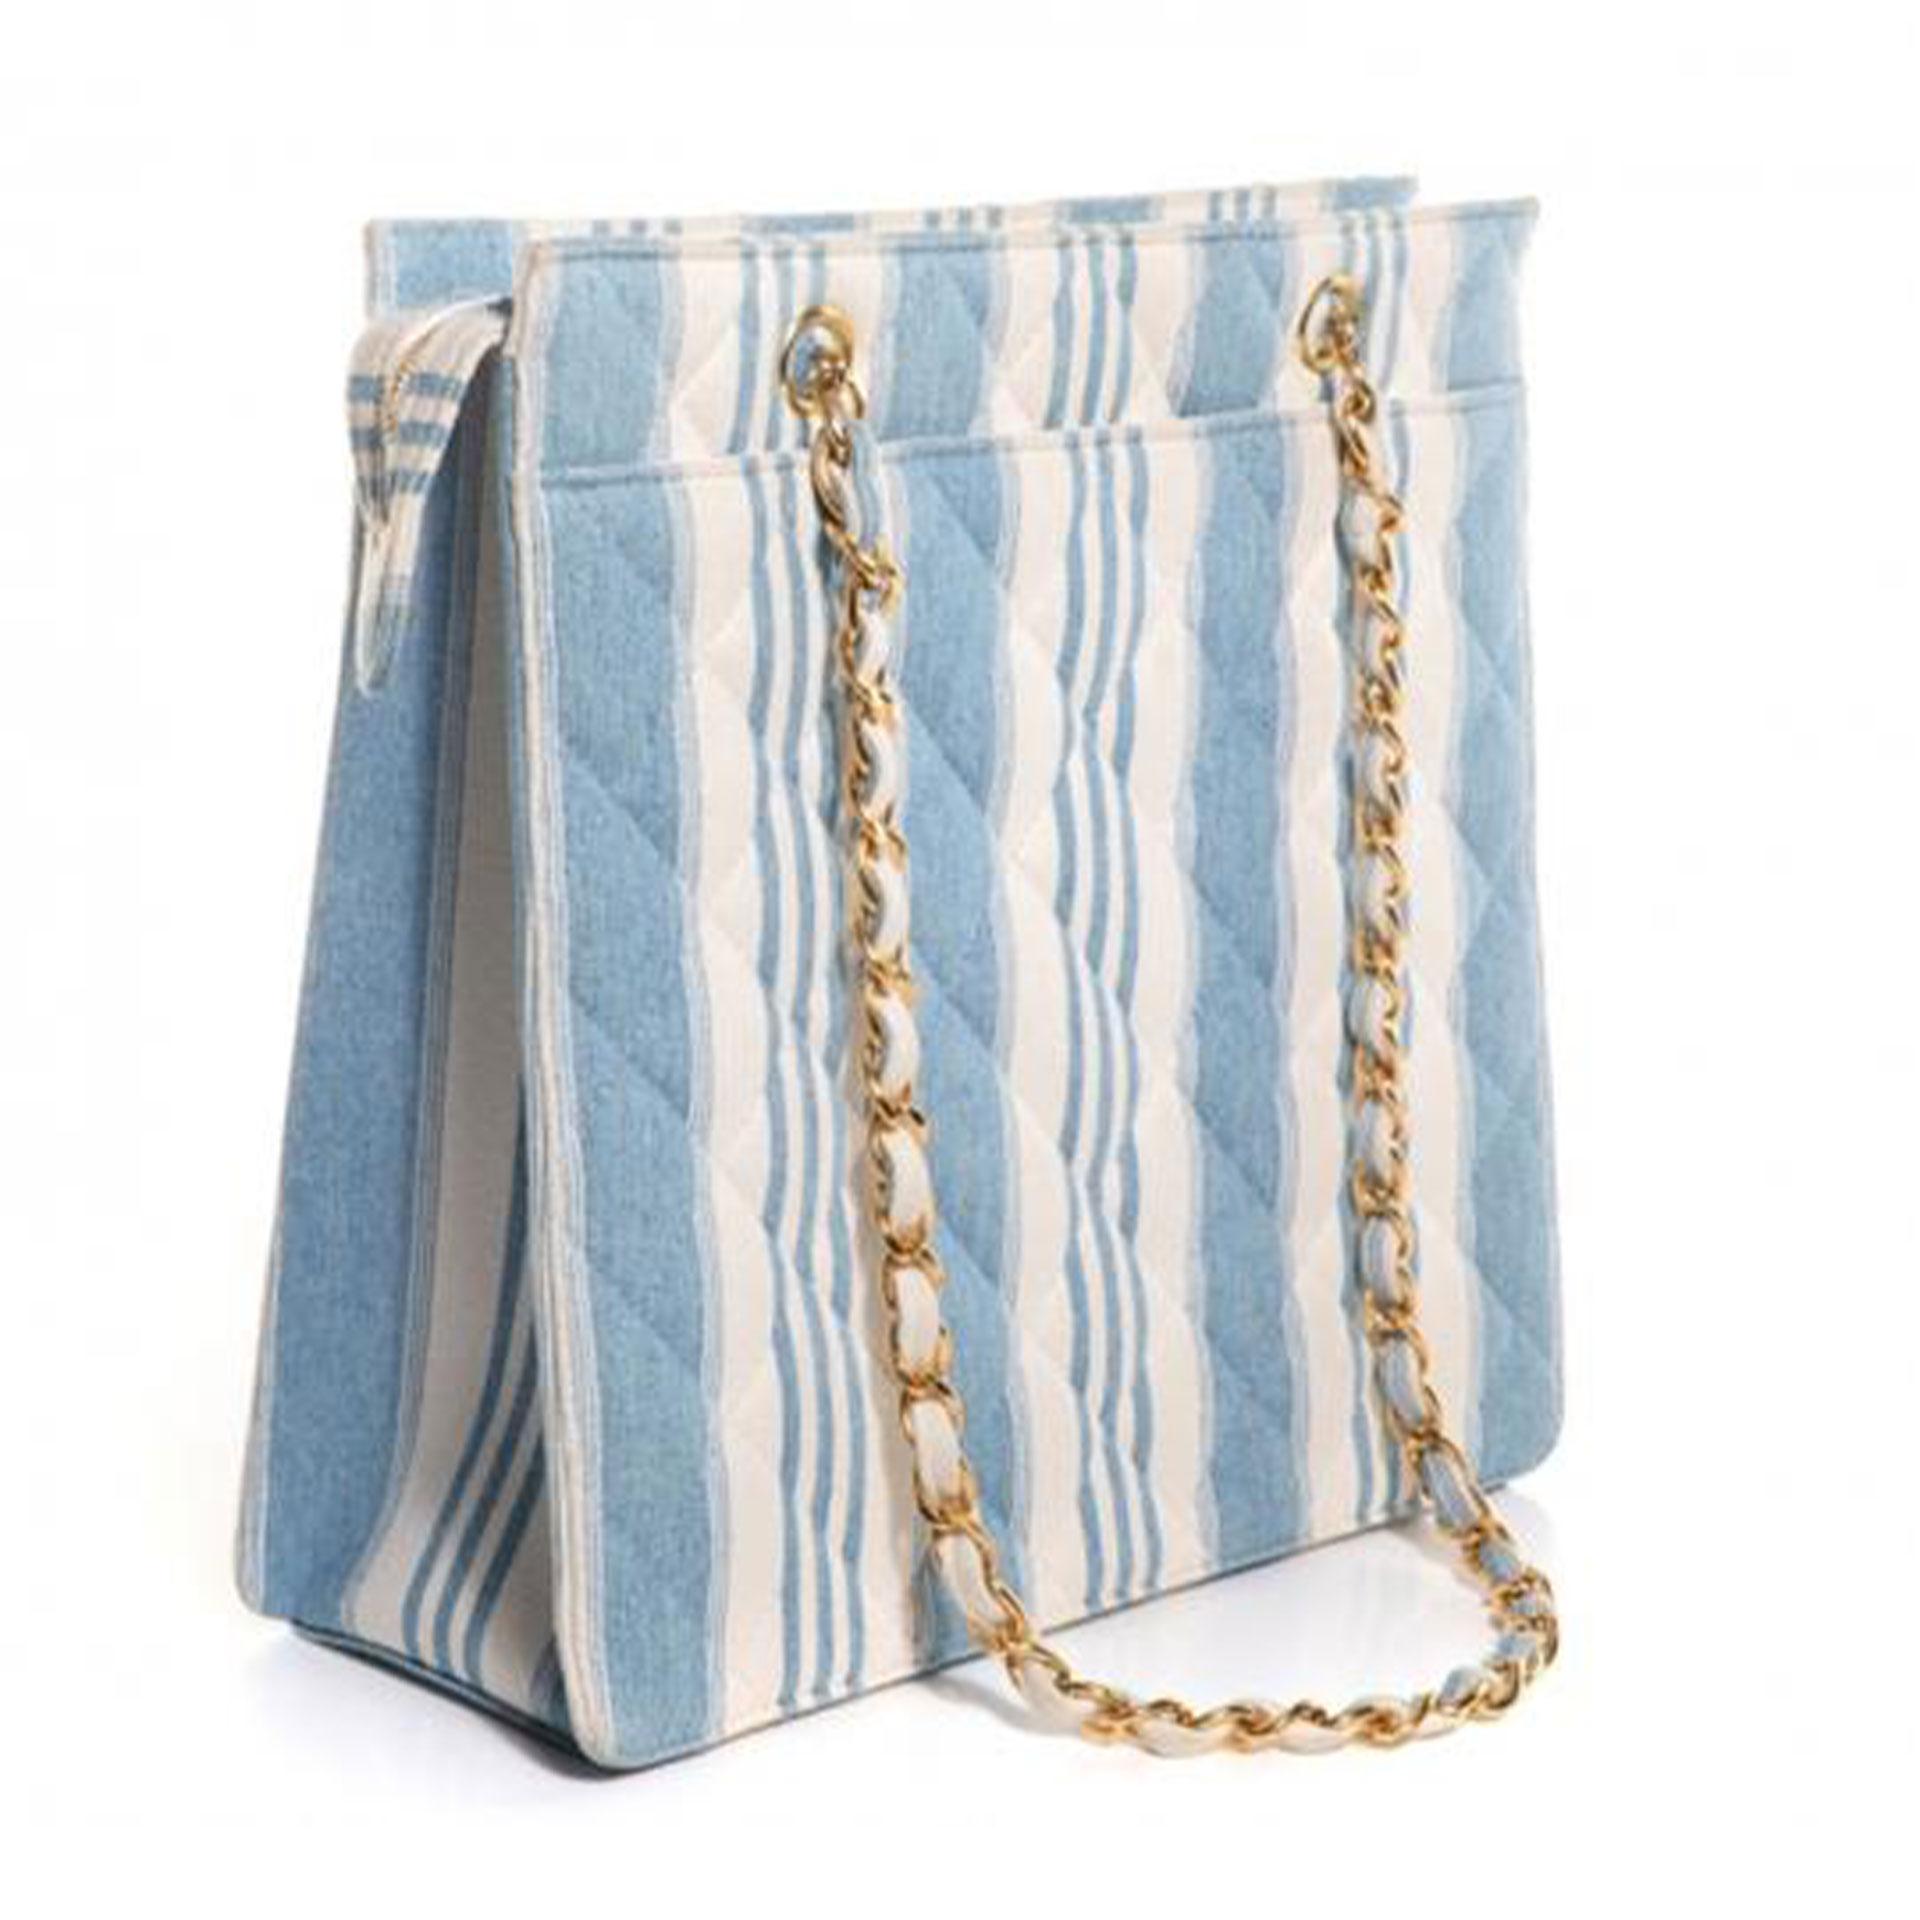 Chanel Vintage 90s Mini Striped Light Blue Denim Tote Shoulder Bag Shopping Tote

1997 {VINTAGE 25 Years}
Gold hardware
Double handle chain
Quilted jean denim striped blue and white
Zippered main compartment
Leather lined interior
Main interior